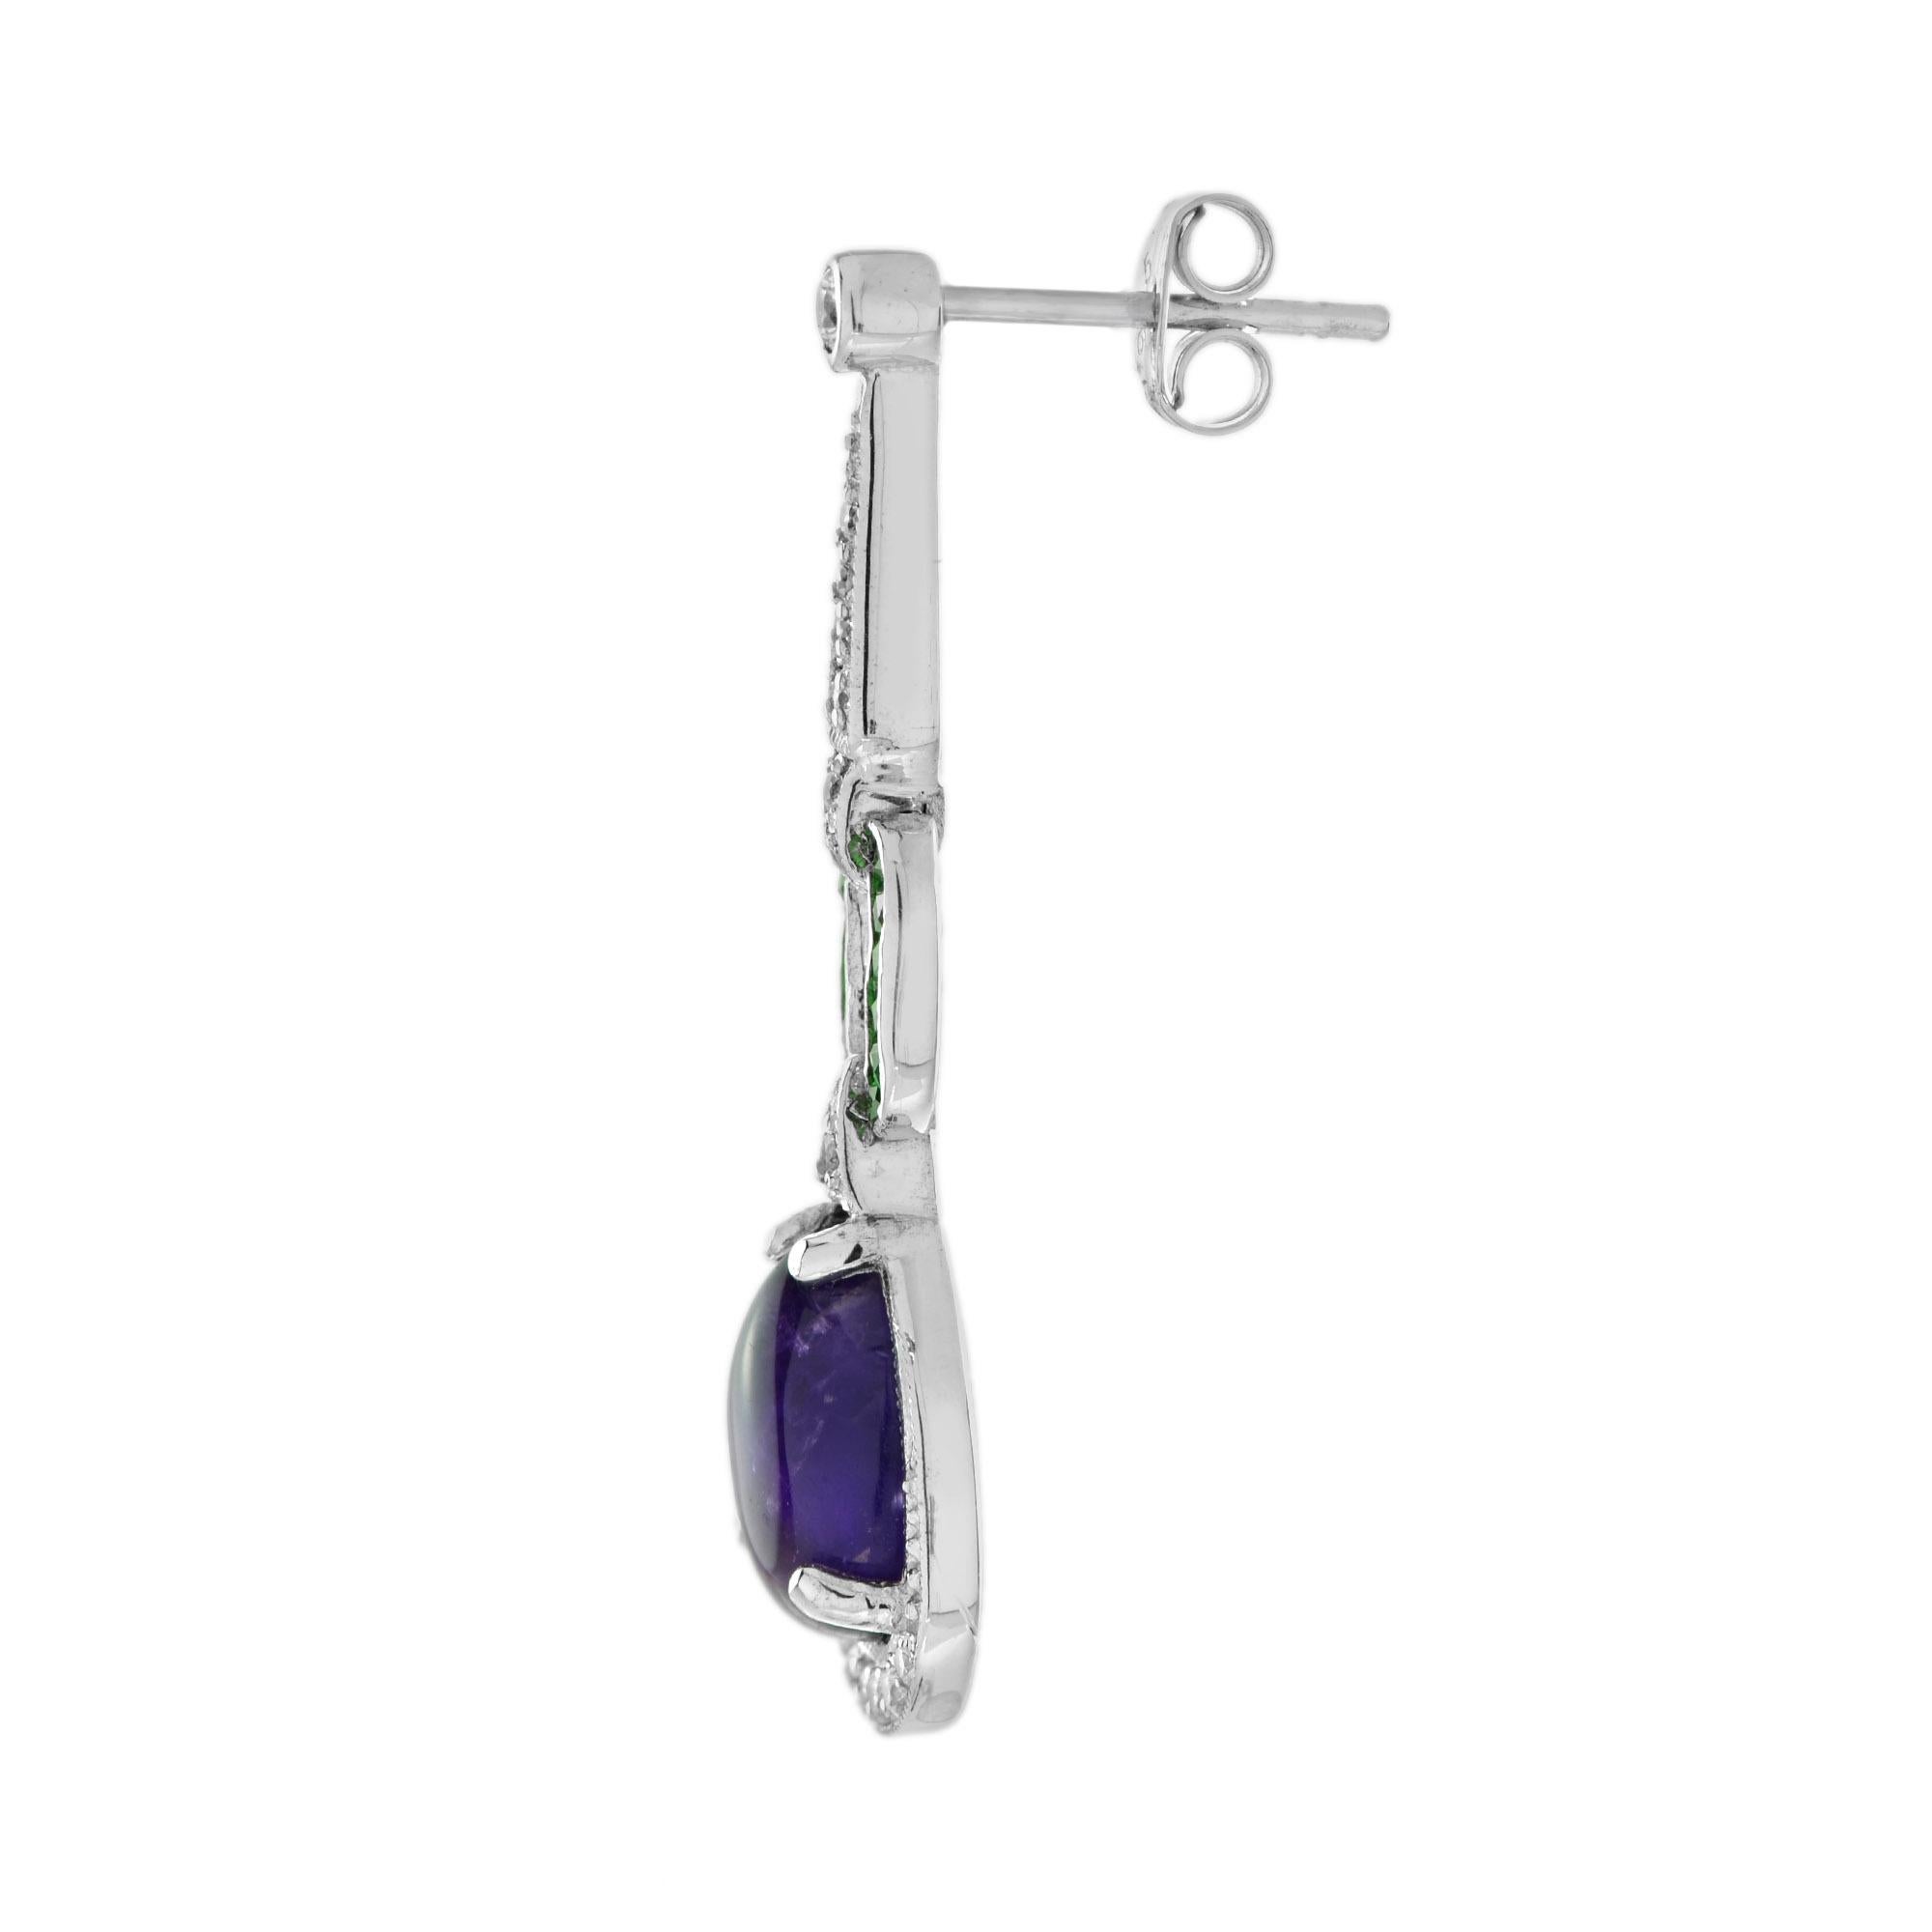 Impressive vintage inspired white gold dangle earrings mounted with cabochon amethysts, emeralds, and round cut diamonds. 

Earrings Information
Style: Art Deco
Metal: 14K White Gold
Width: 10 mm.
Length: 35 mm.
Total weight: 5.53 g. (approx. total